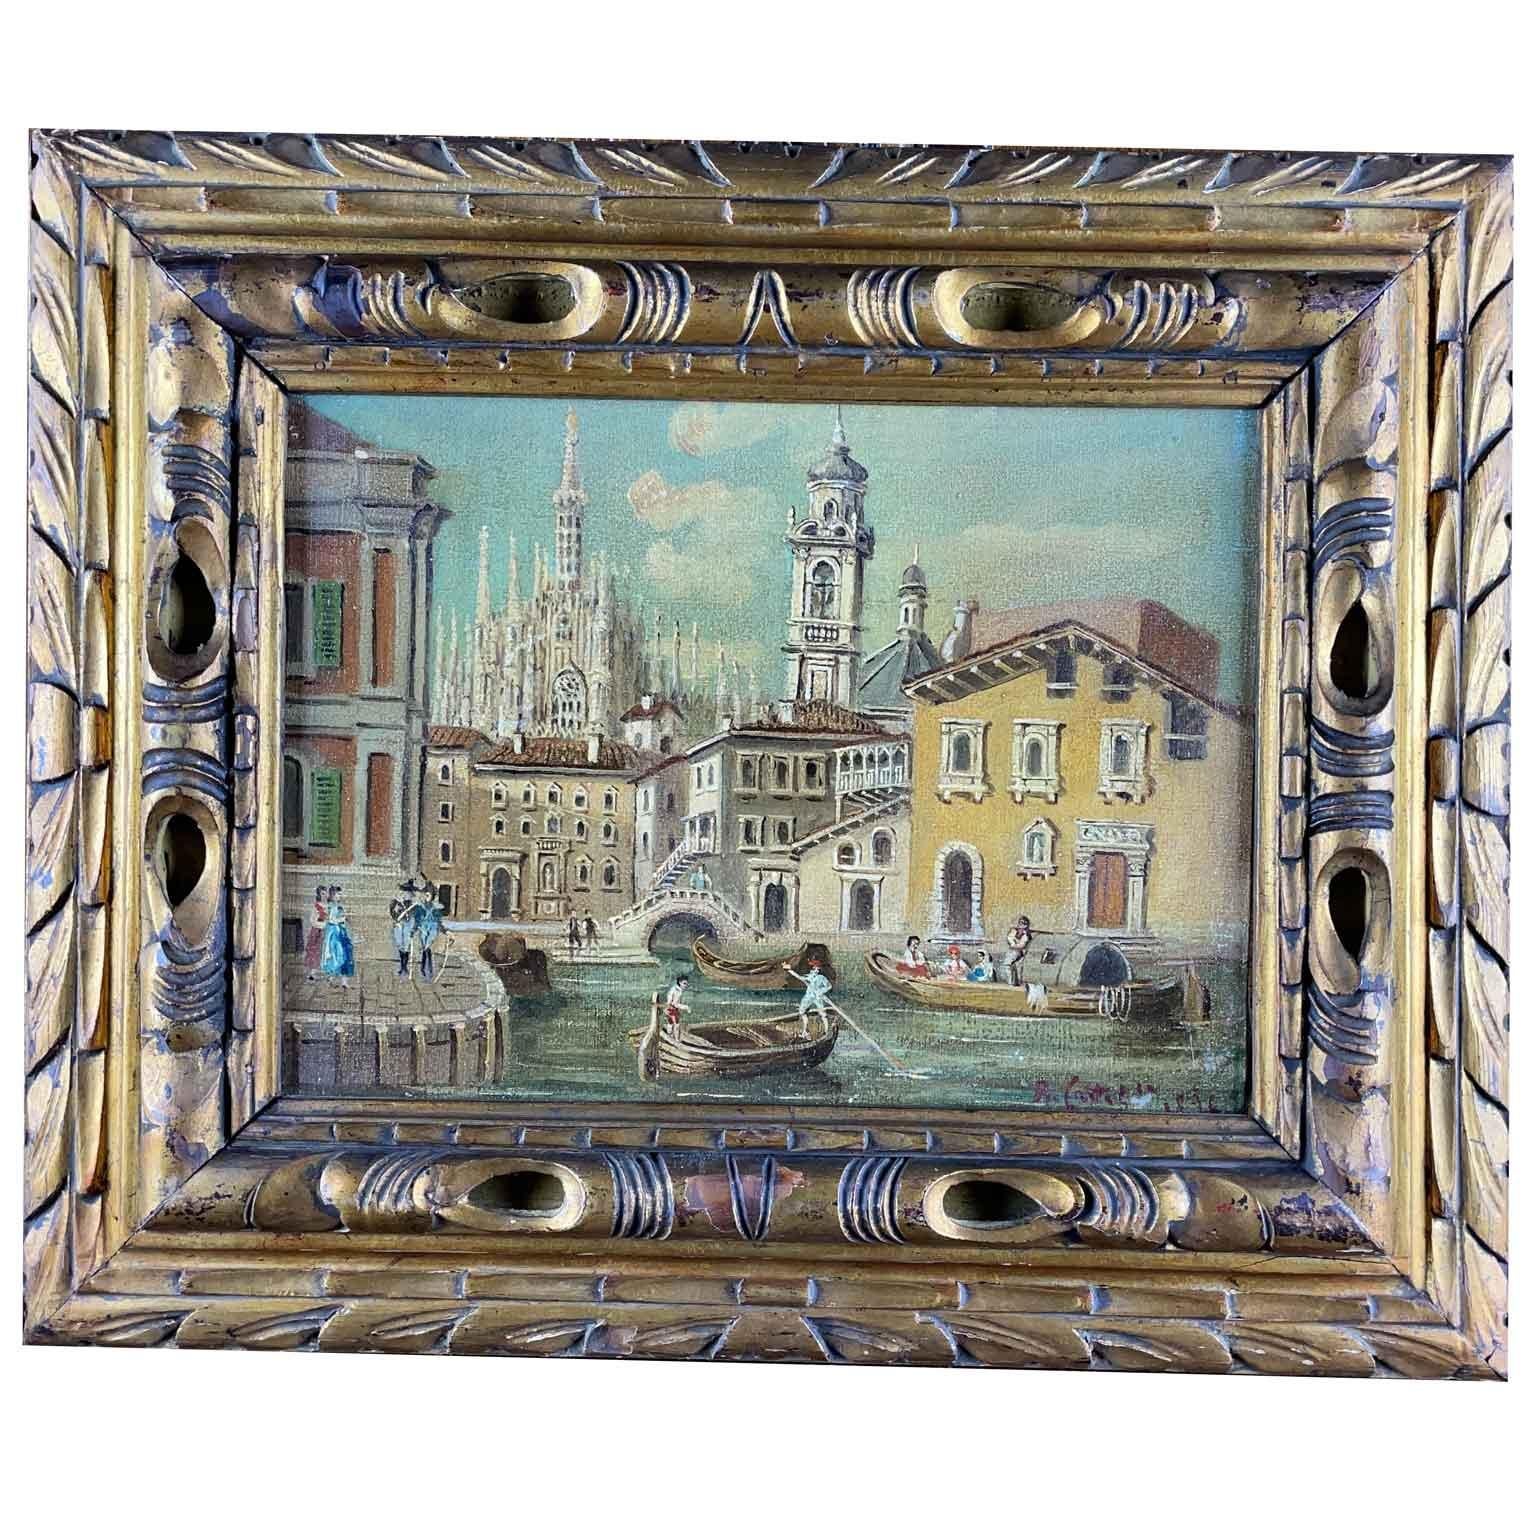 Set of Two Italian Landscape Paintings 1950s circa Milan Duomo Cathedral Views 3